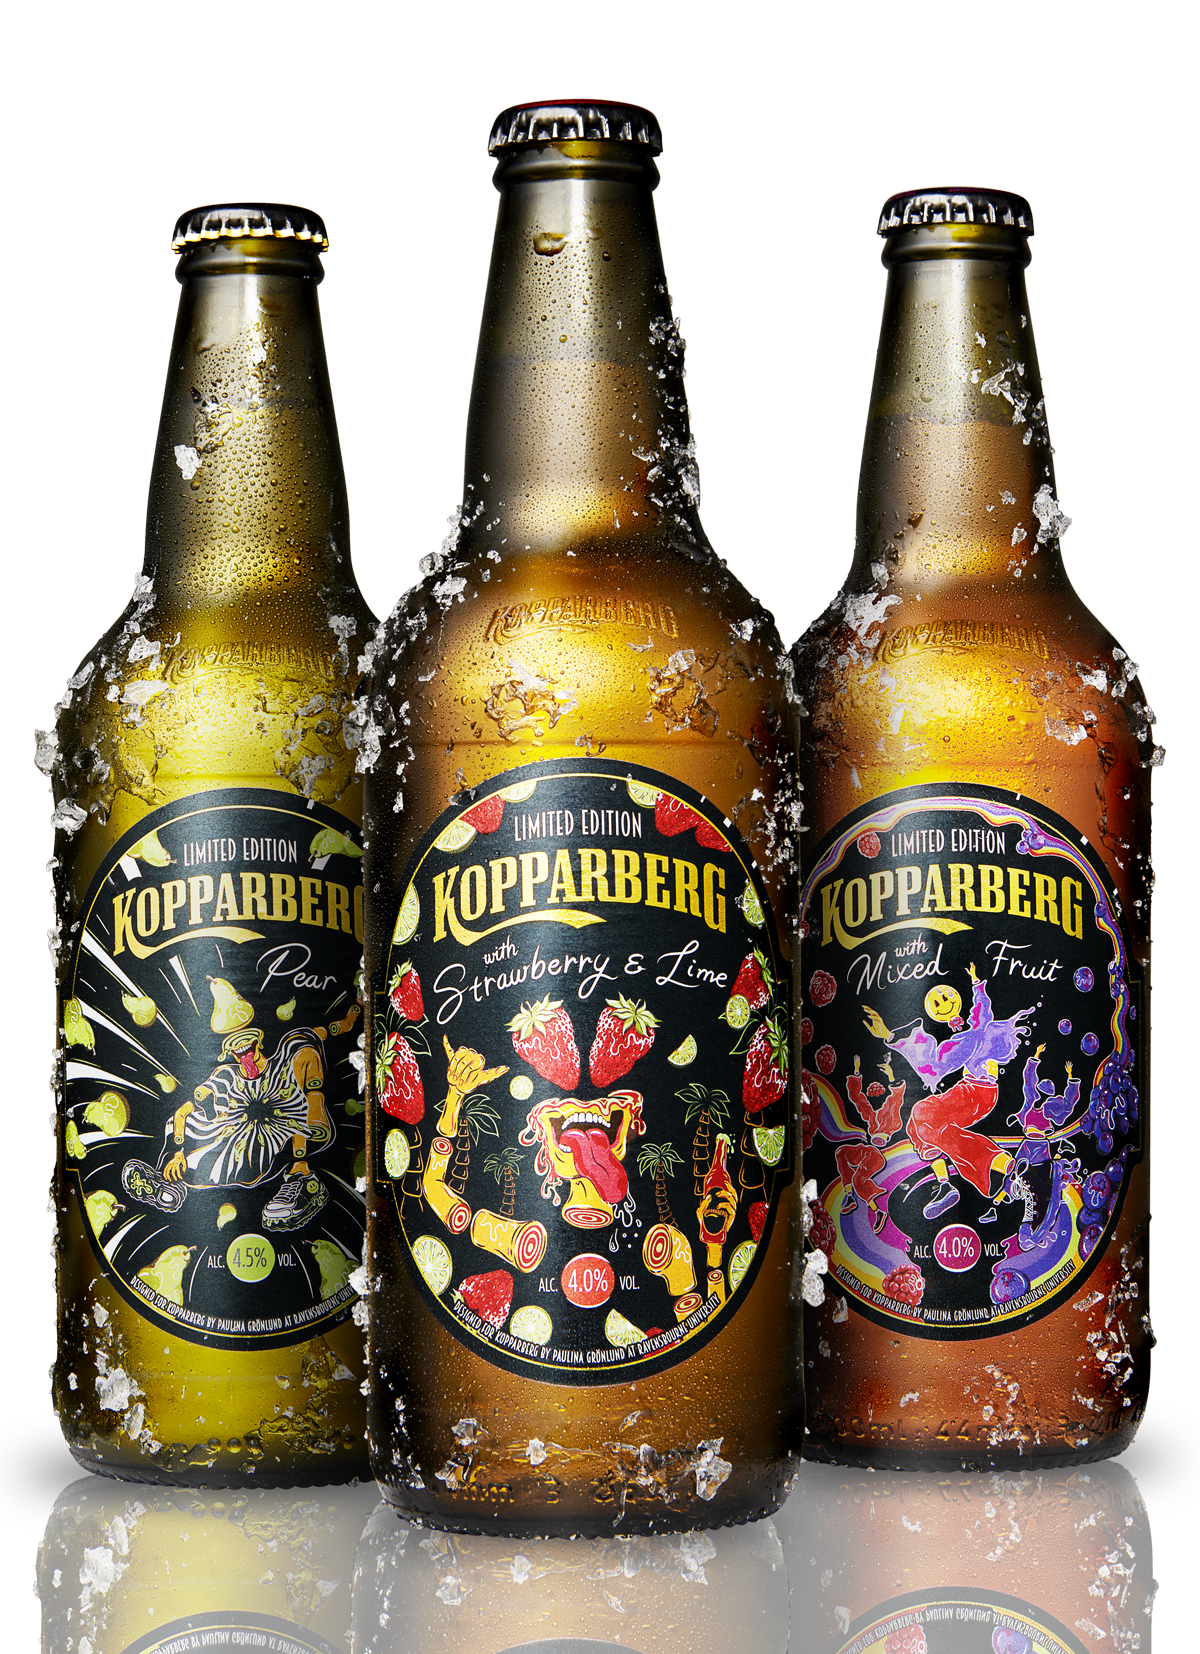 Student creates new, limited-edition label design for Kopparberg